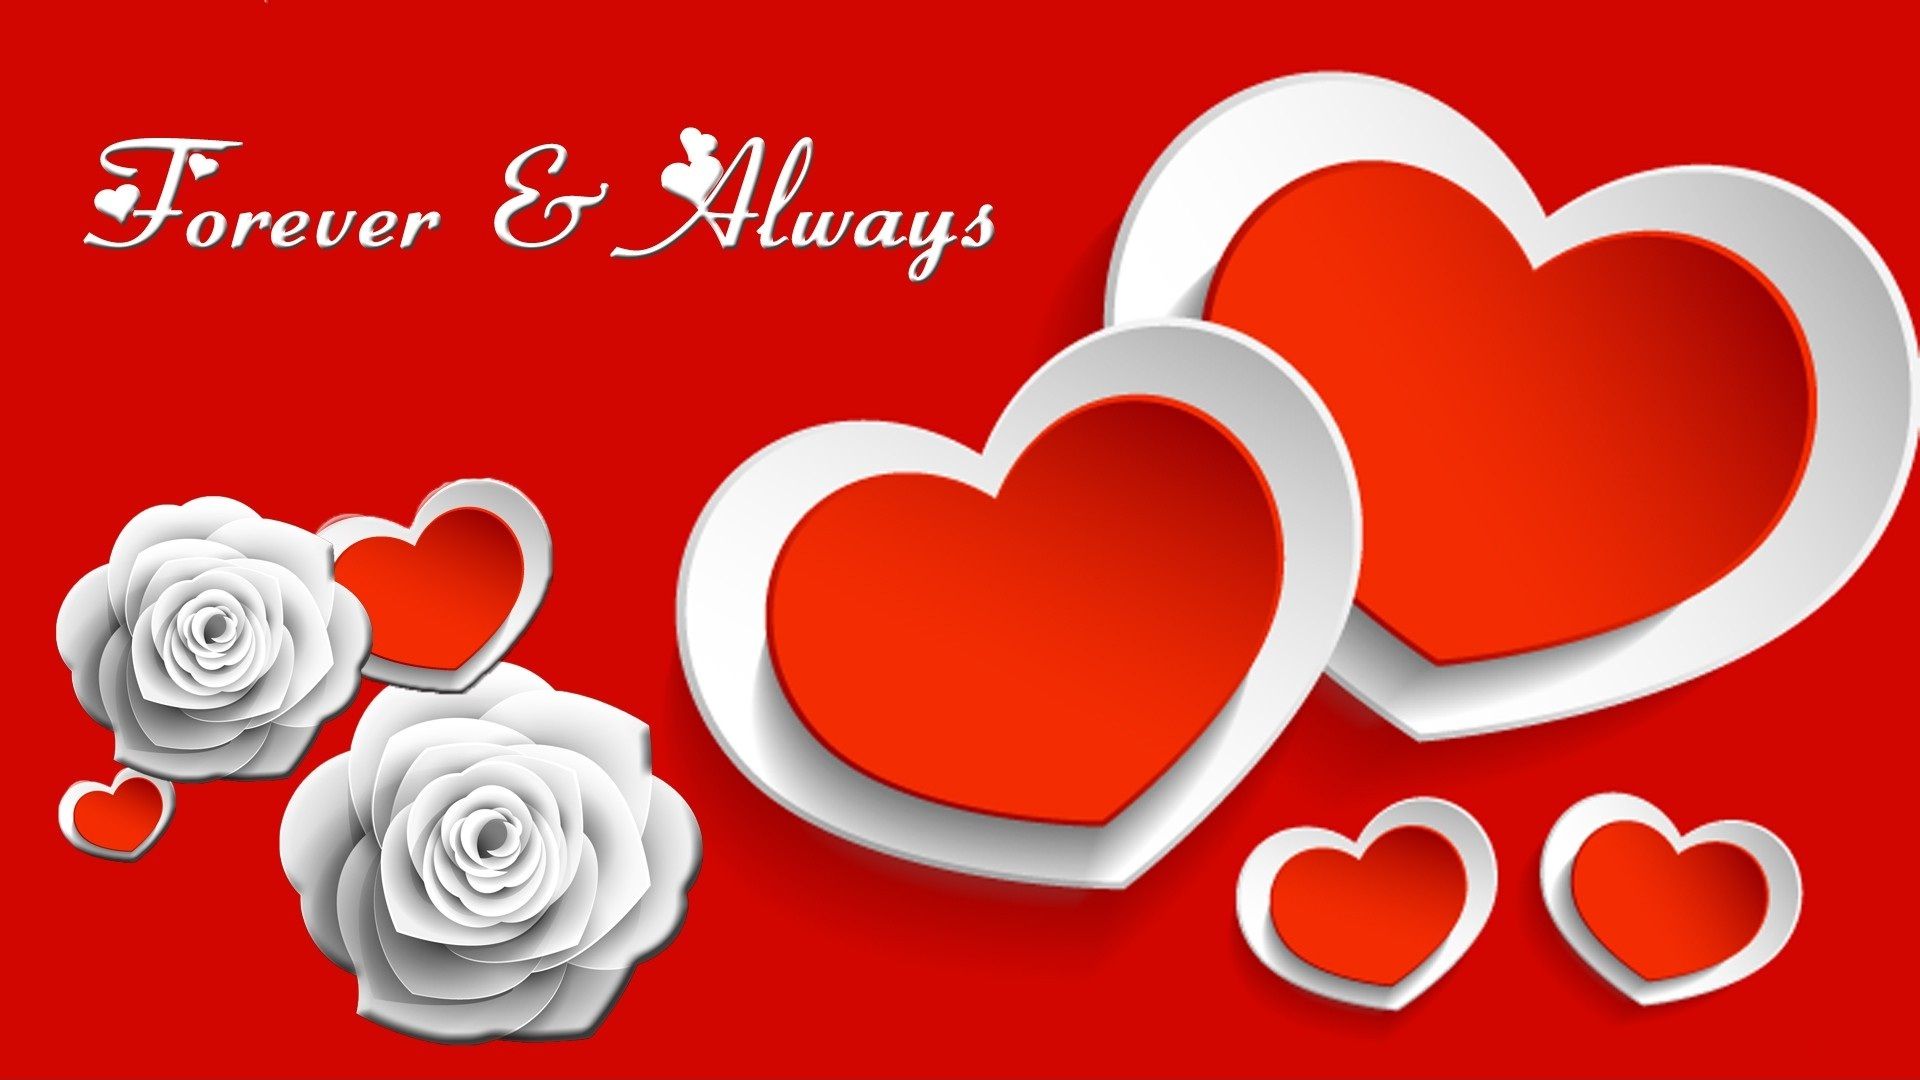 Love Forever And Always - Wallpaper , HD Wallpaper & Backgrounds